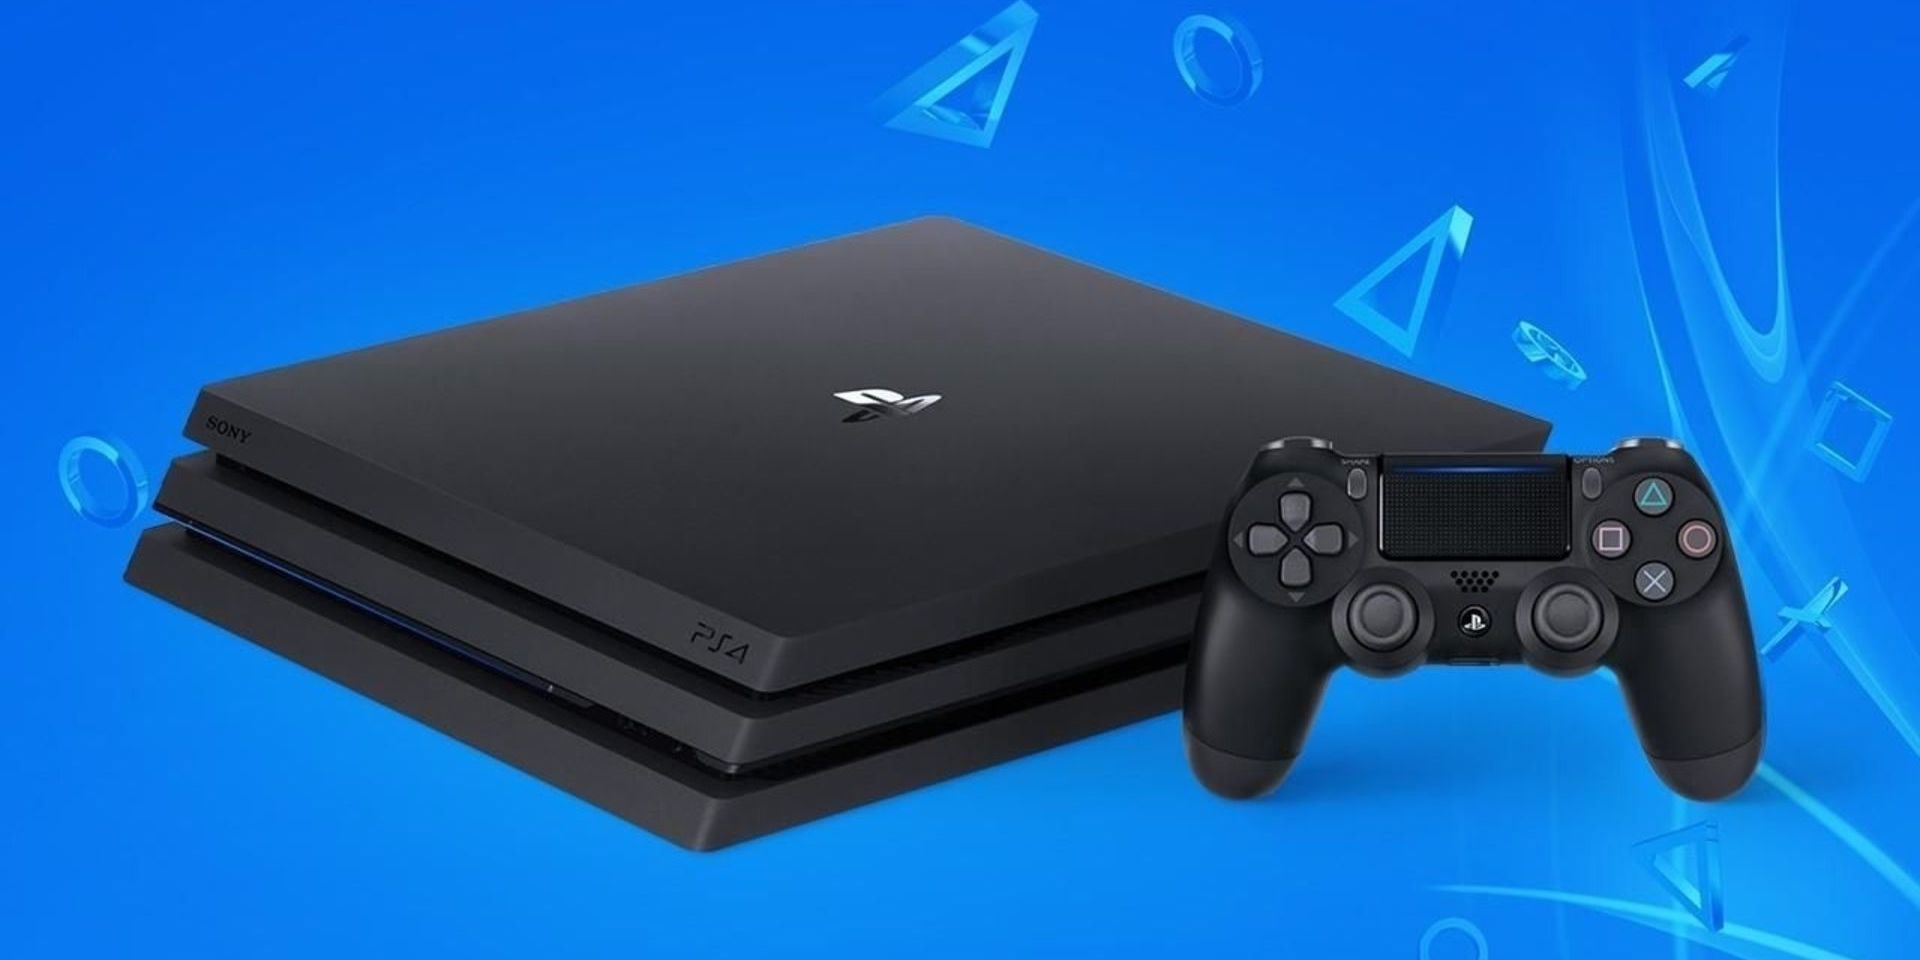 playstation 4 pro console for sale